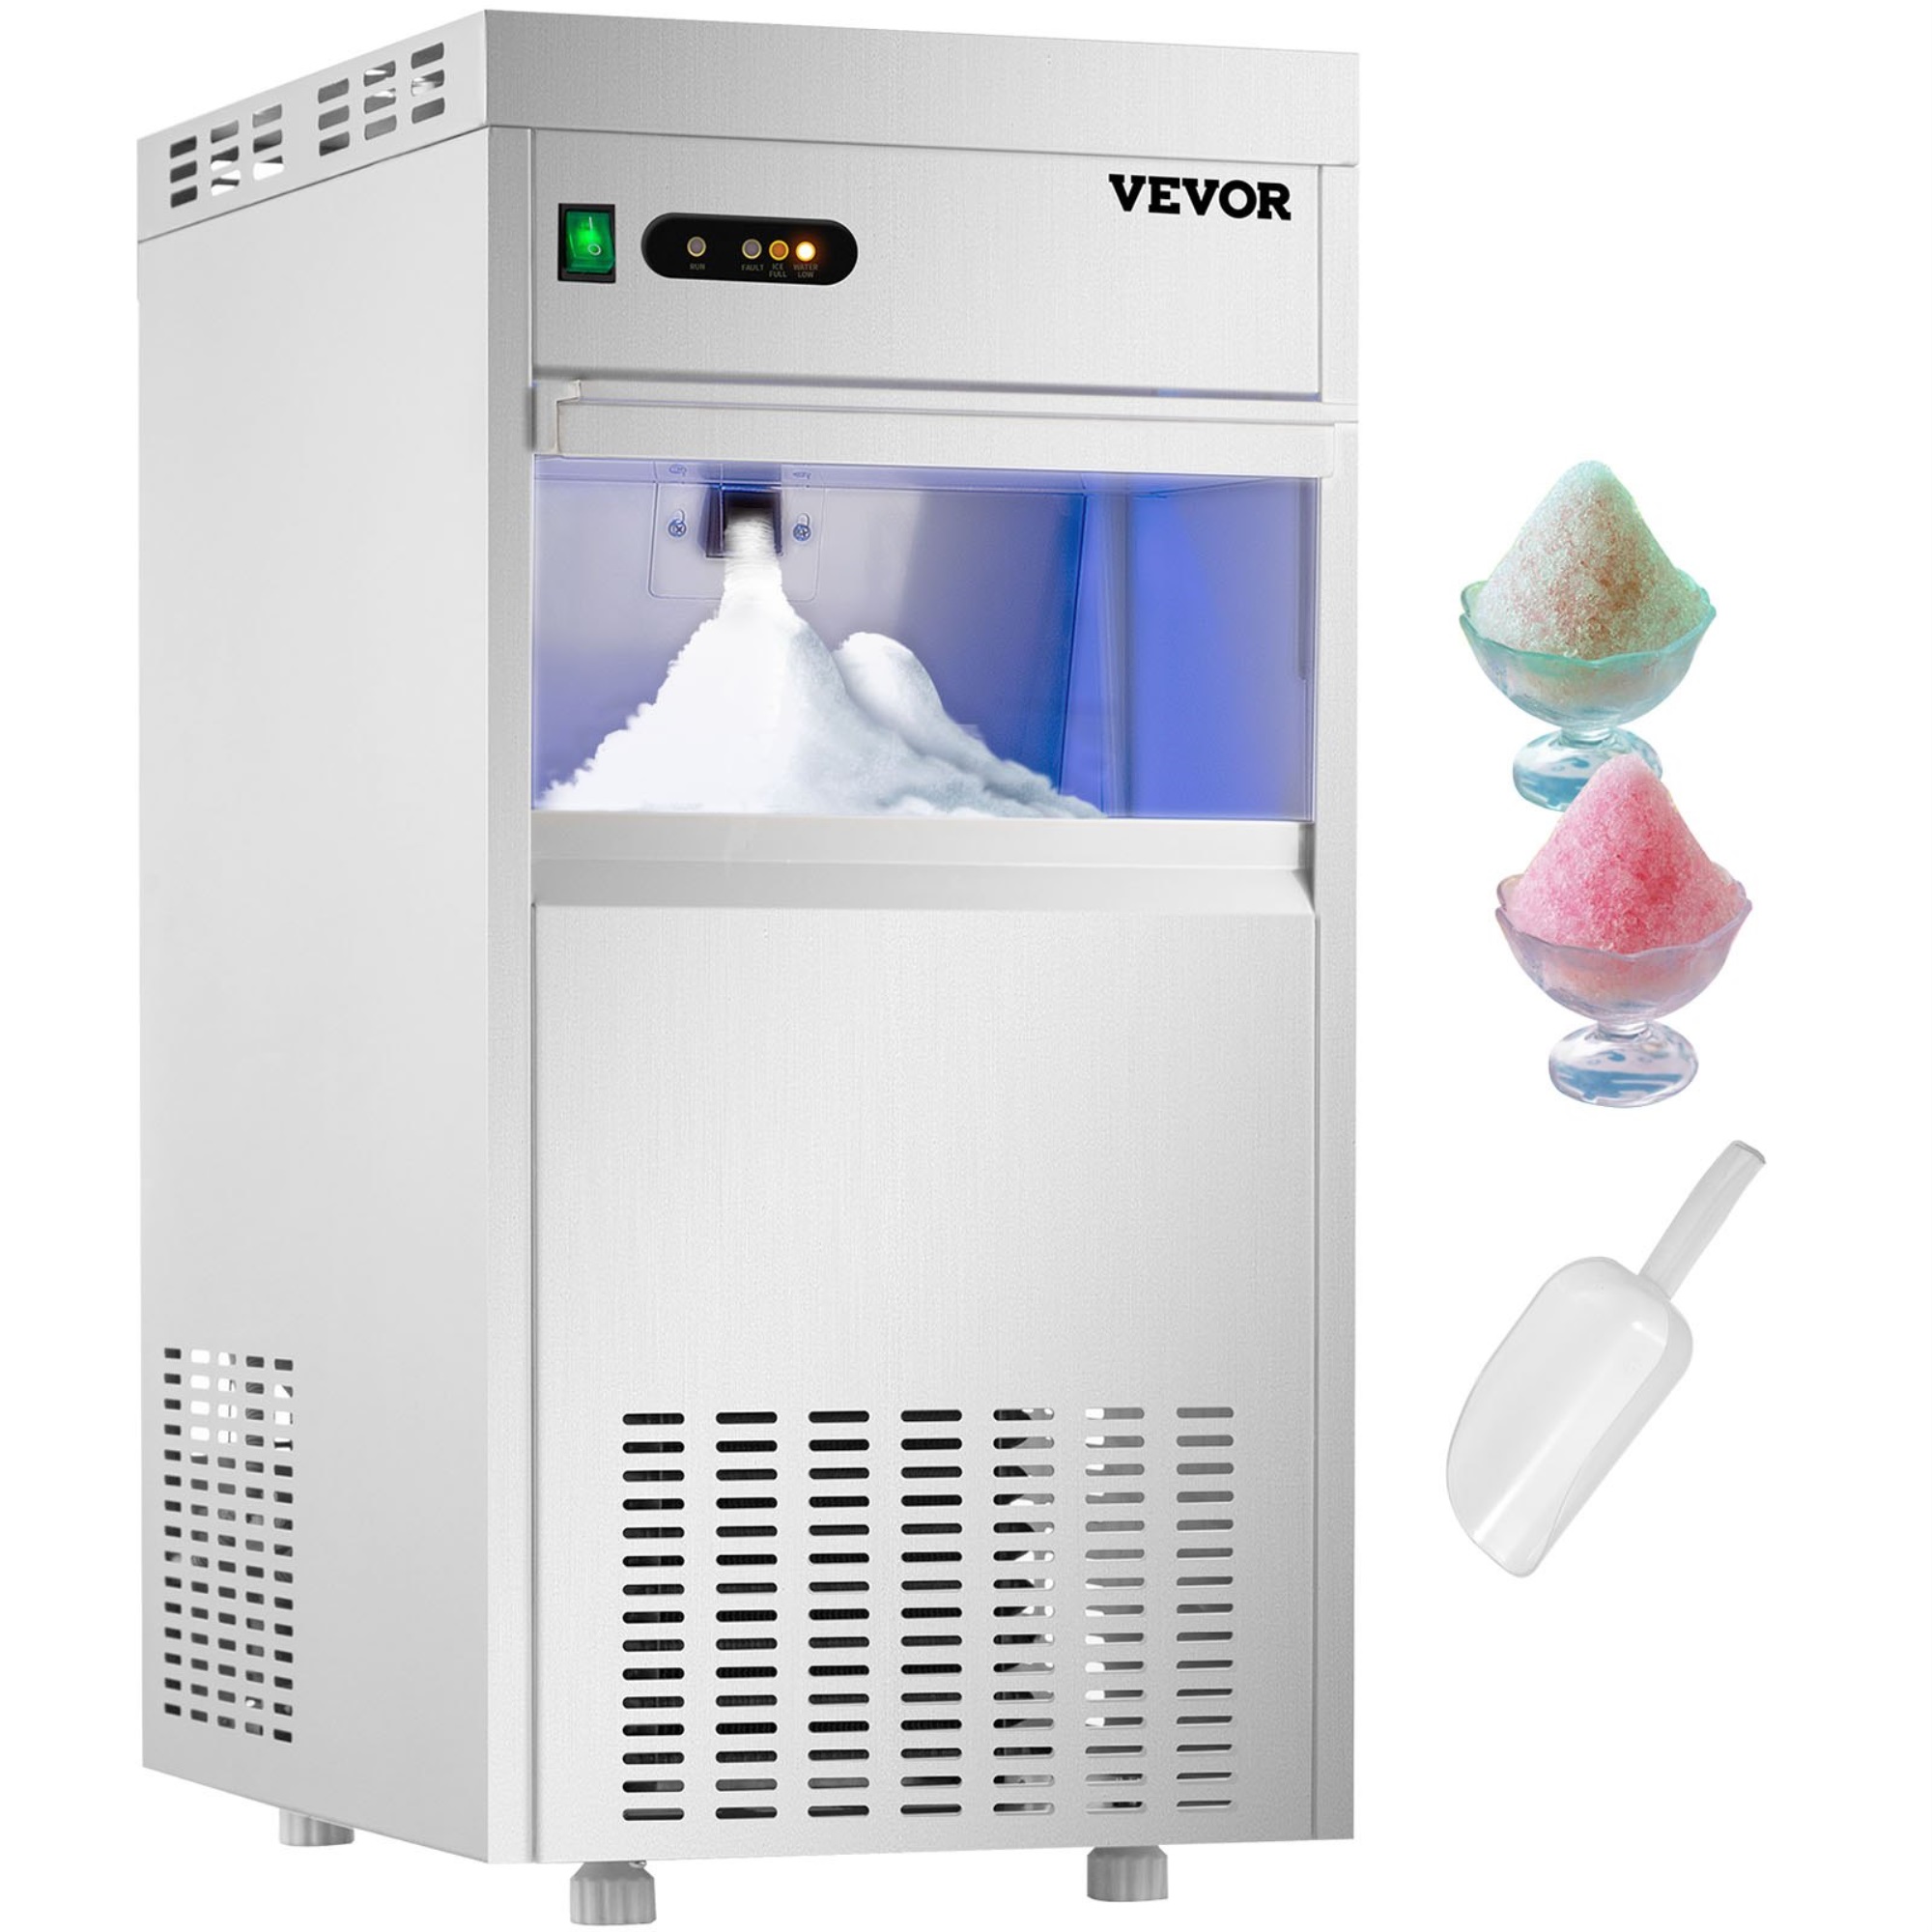 VEVOR 110V Commercial Snowflake Ice Maker 220LBS/24H, ETL Approved, Food Grade Stainless Steel Construction, Automatic Operation